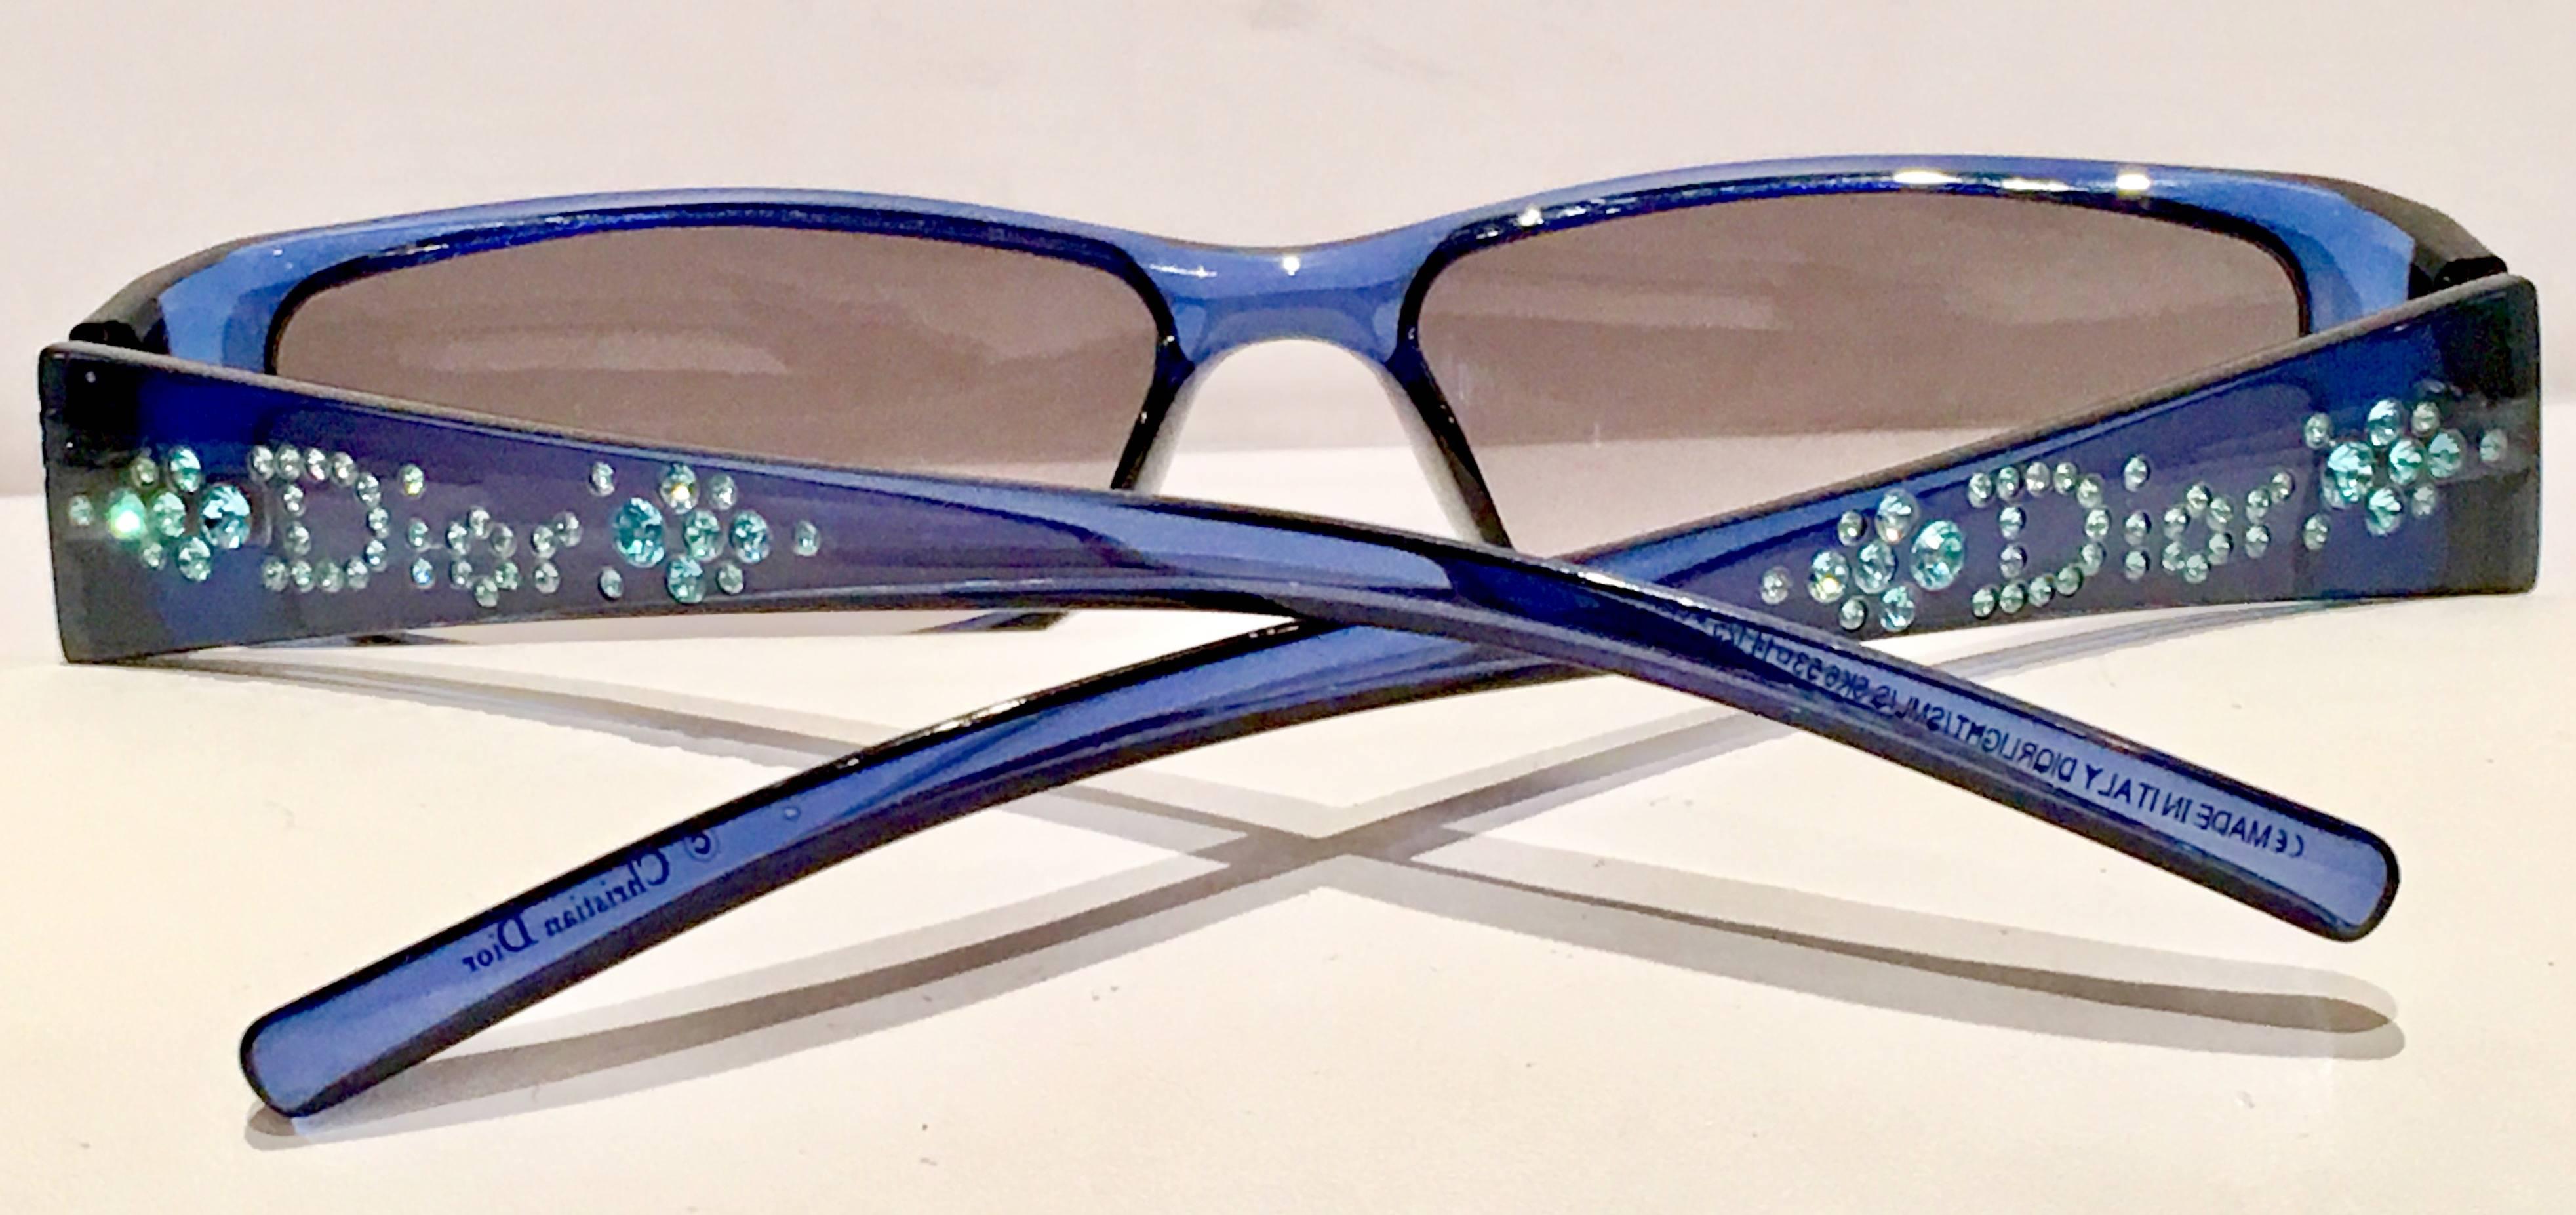 Rare Christian Dior vintage electric blue reader style sunglasses. Features bright blue embellished Swarofski crystal rhinestones on both arms with the 